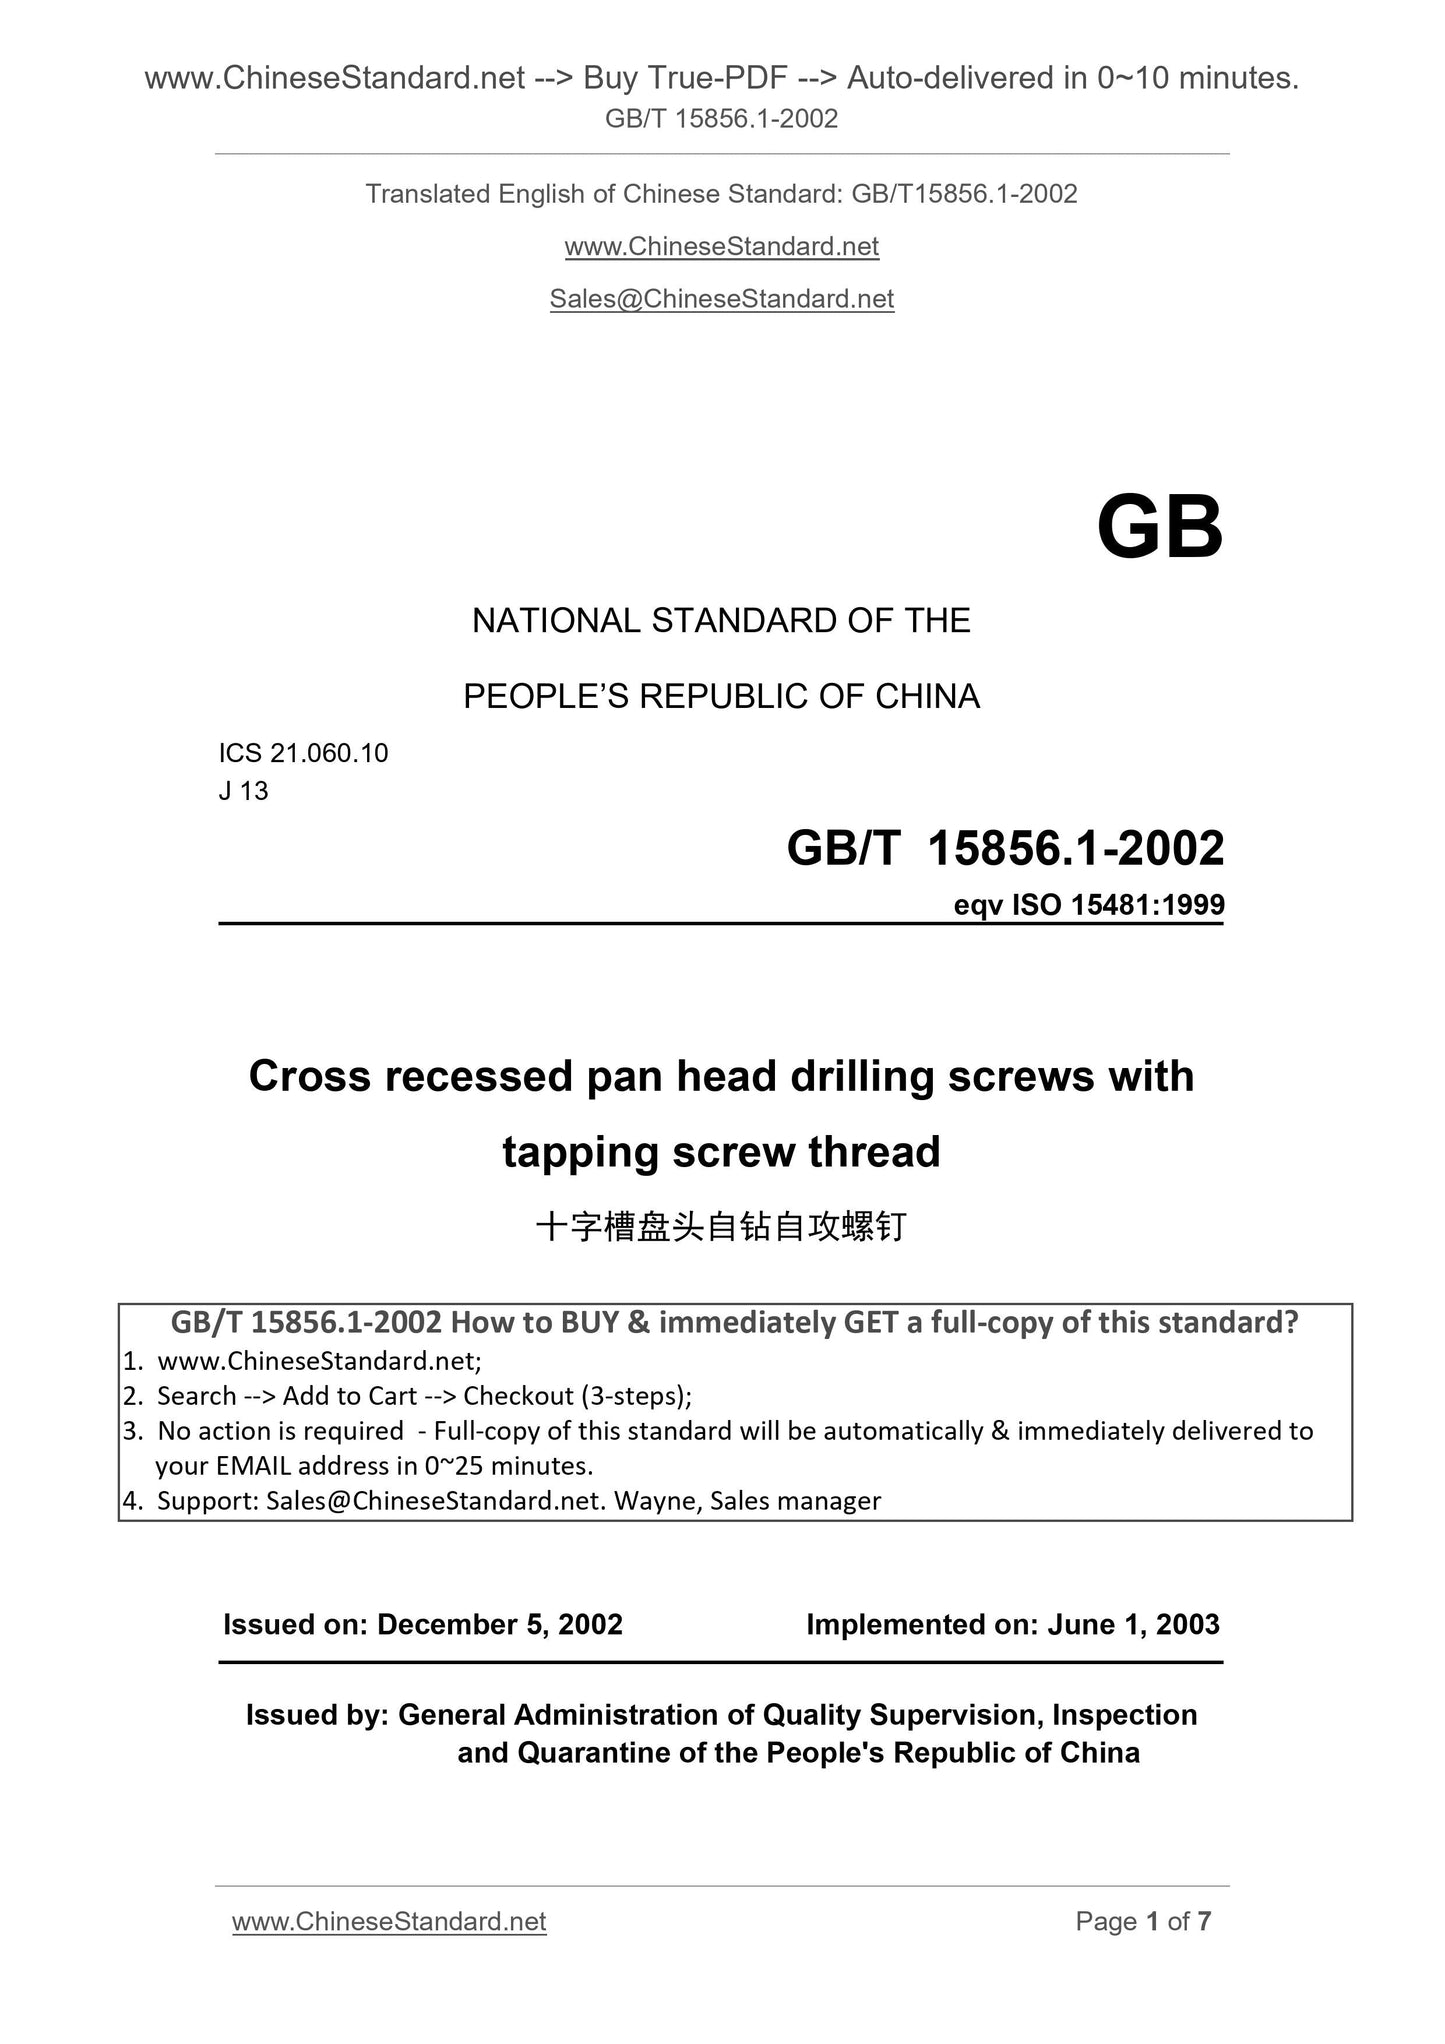 GB/T 15856.1-2002 Page 1